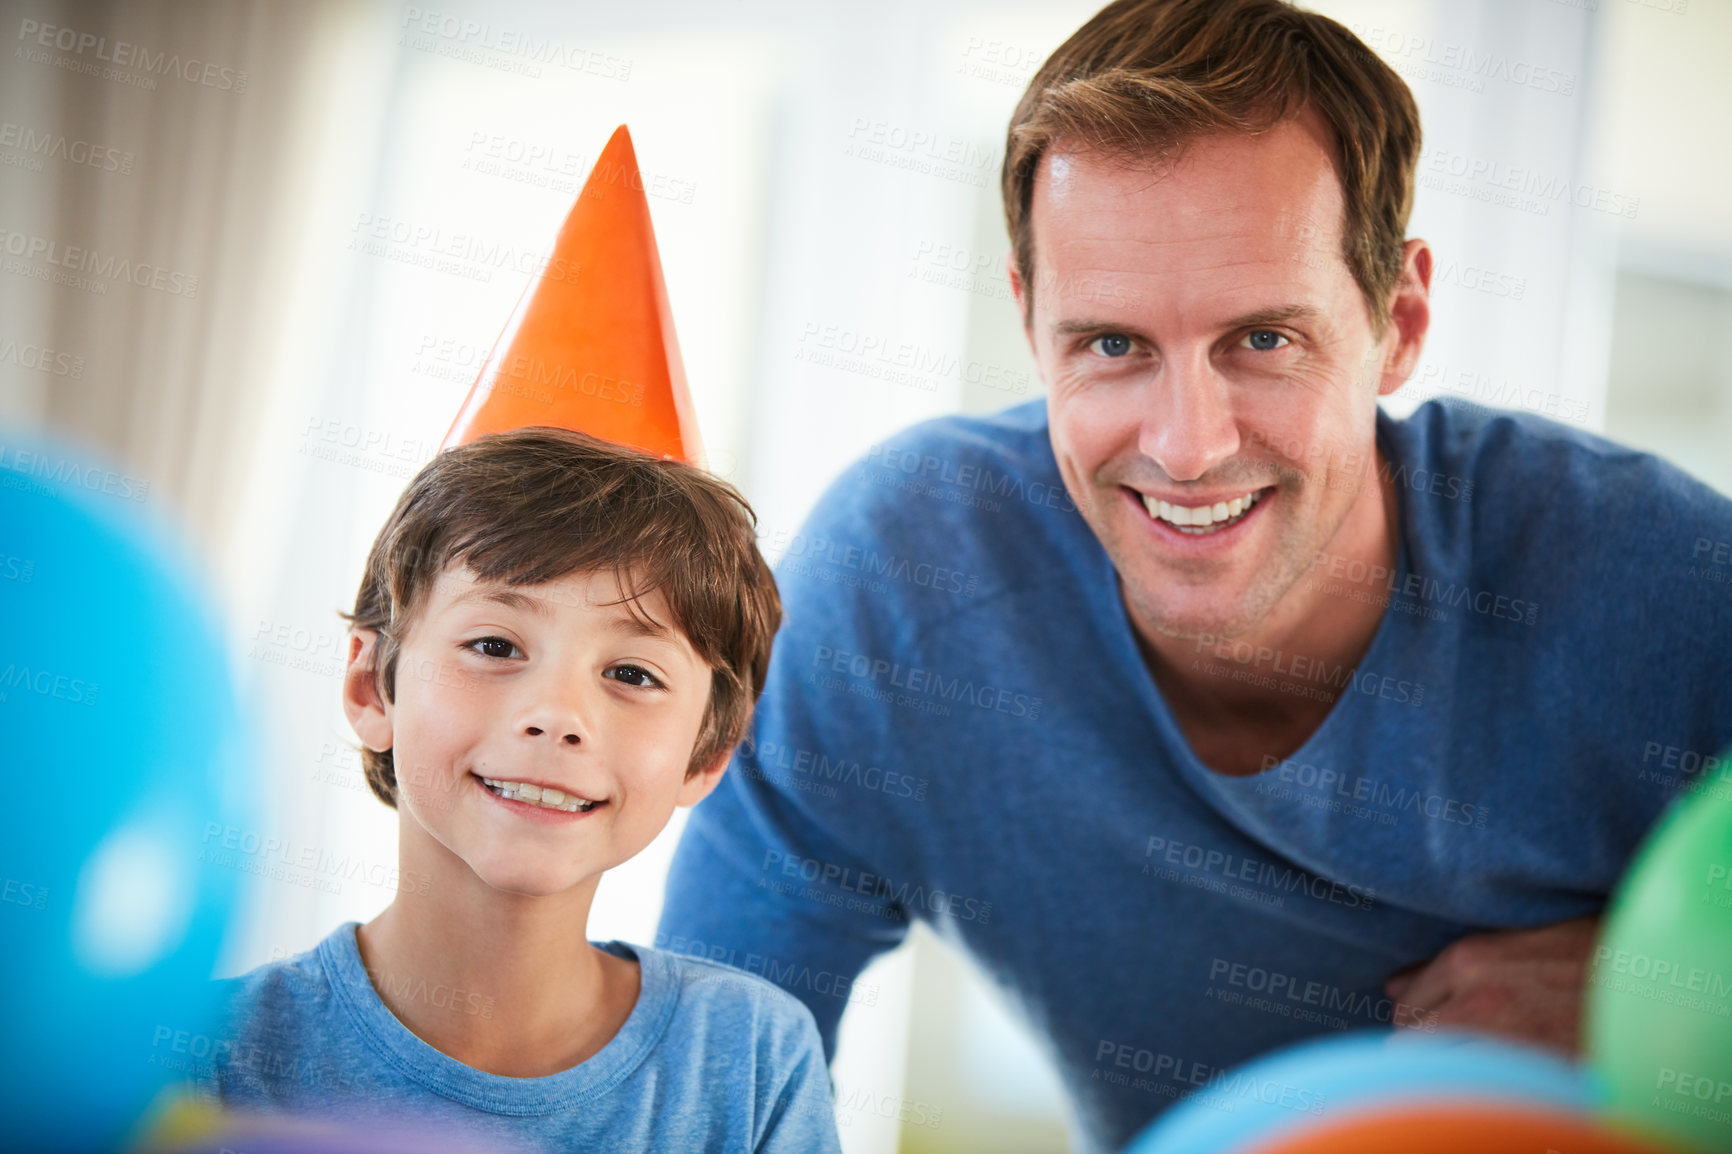 Buy stock photo Portrait of a happy father and son having a birthday party at home